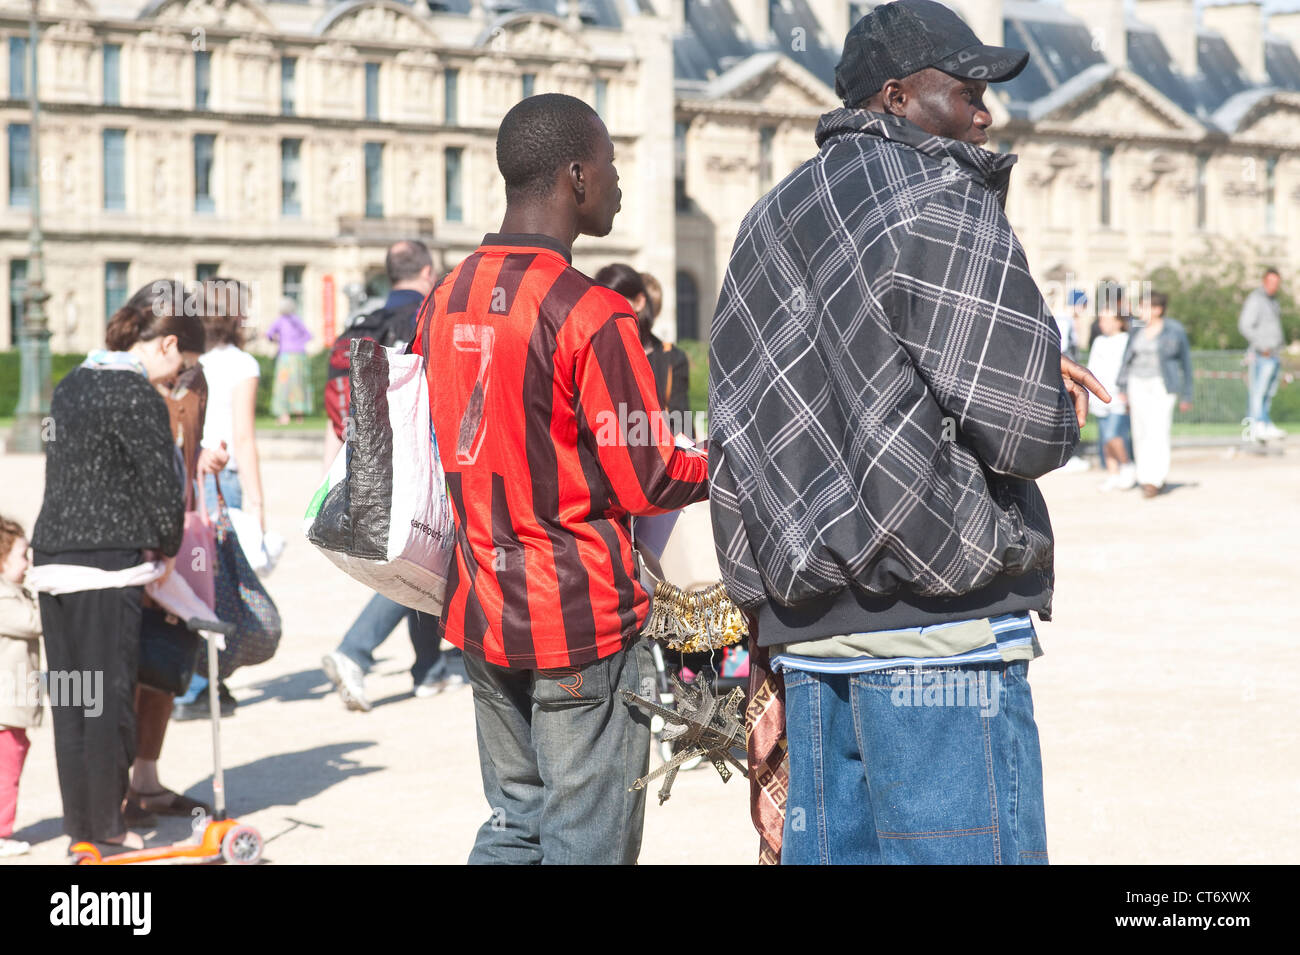 Paris, France - African selling selling souvenirs in the streets Stock Photo